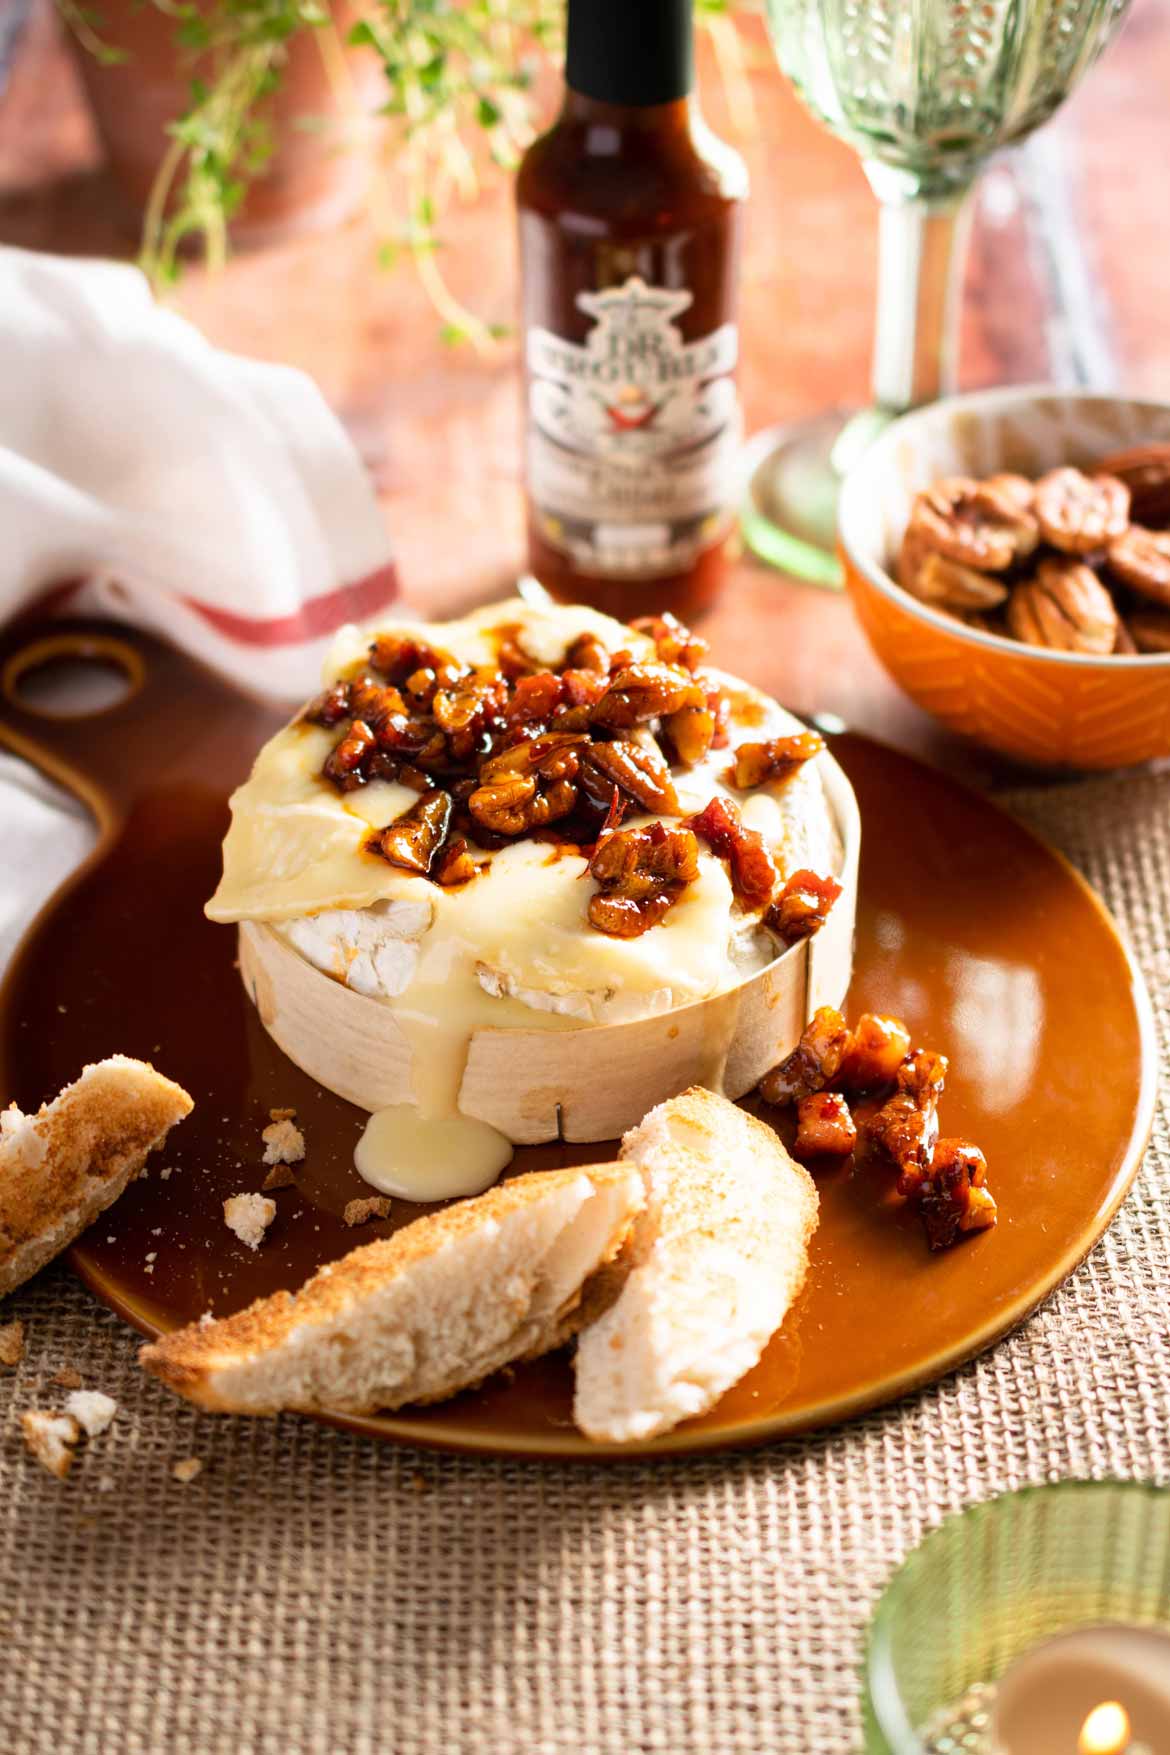 Dr-Trouble-Baked-Camembert-with-Smoked-Chilli-Pancetta-and-Pecans-with-hot-sauce-bottle